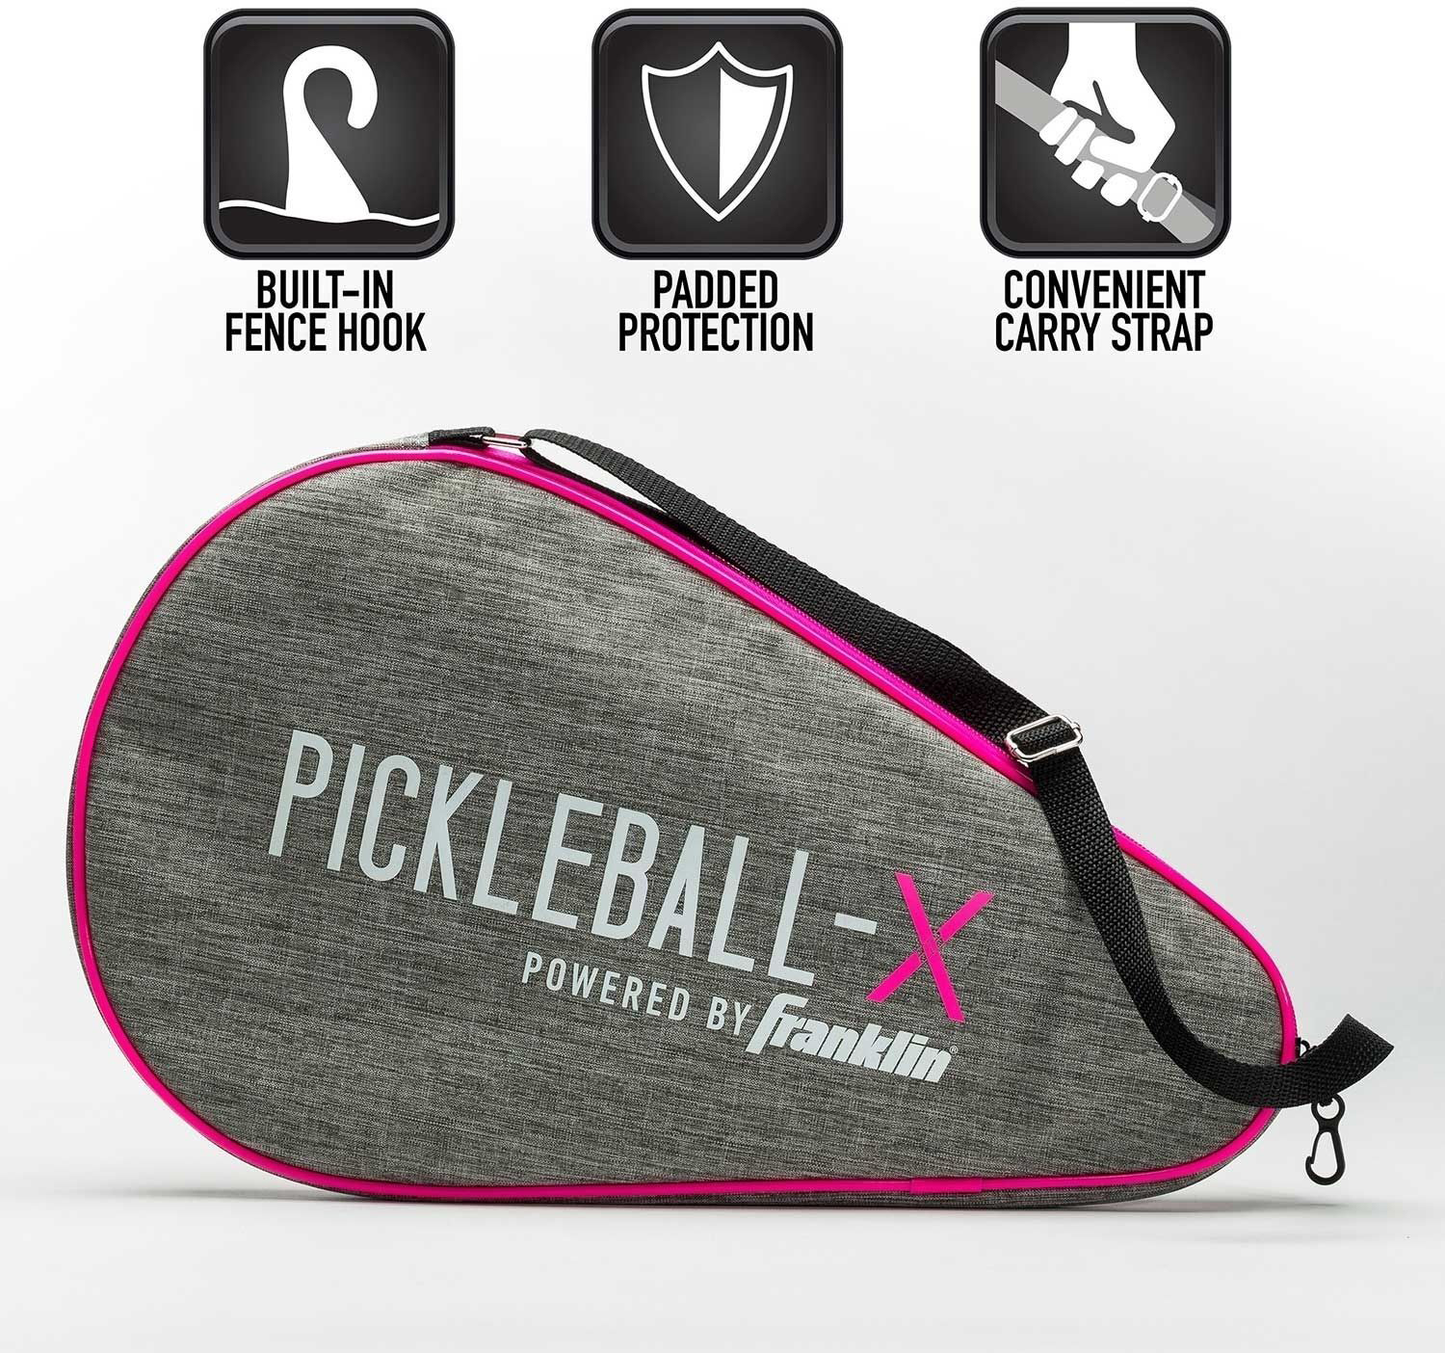 Franklin Pickleball Paddle Bag with convenient carry strap.